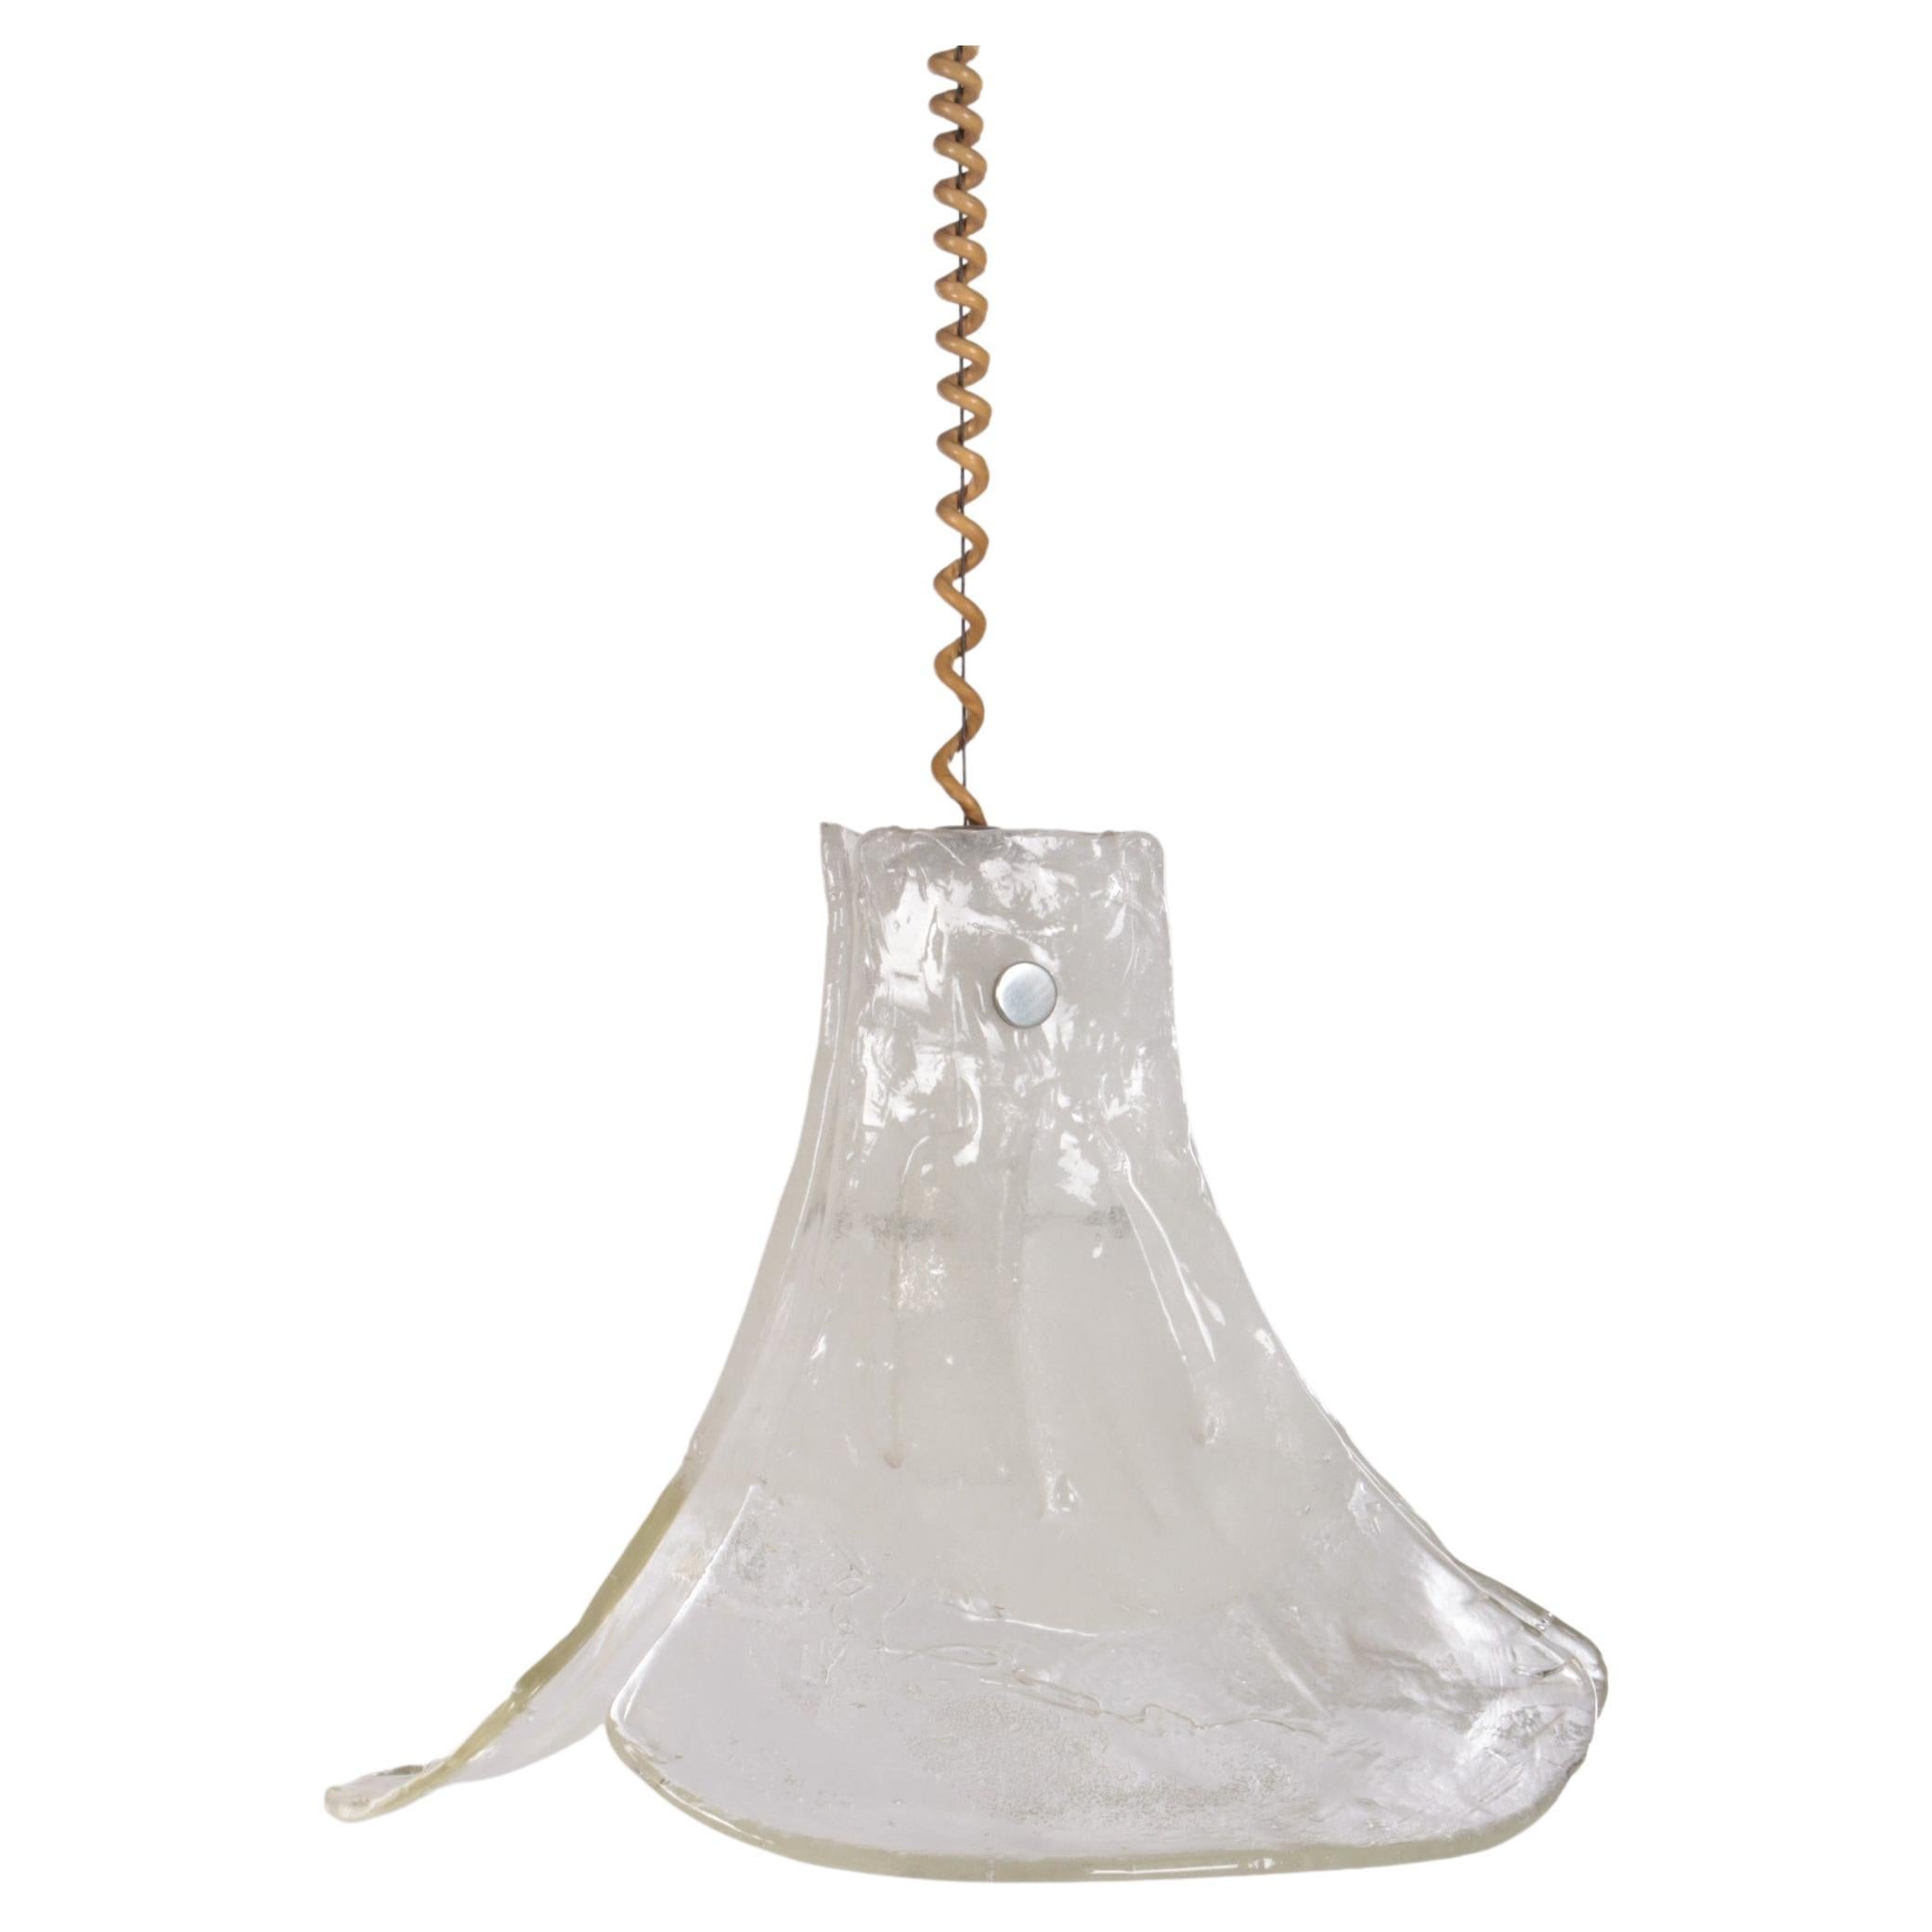 Vintage Mid-Century Glass Hanging Lamp by J. T. Kalmar, 1960 For Sale